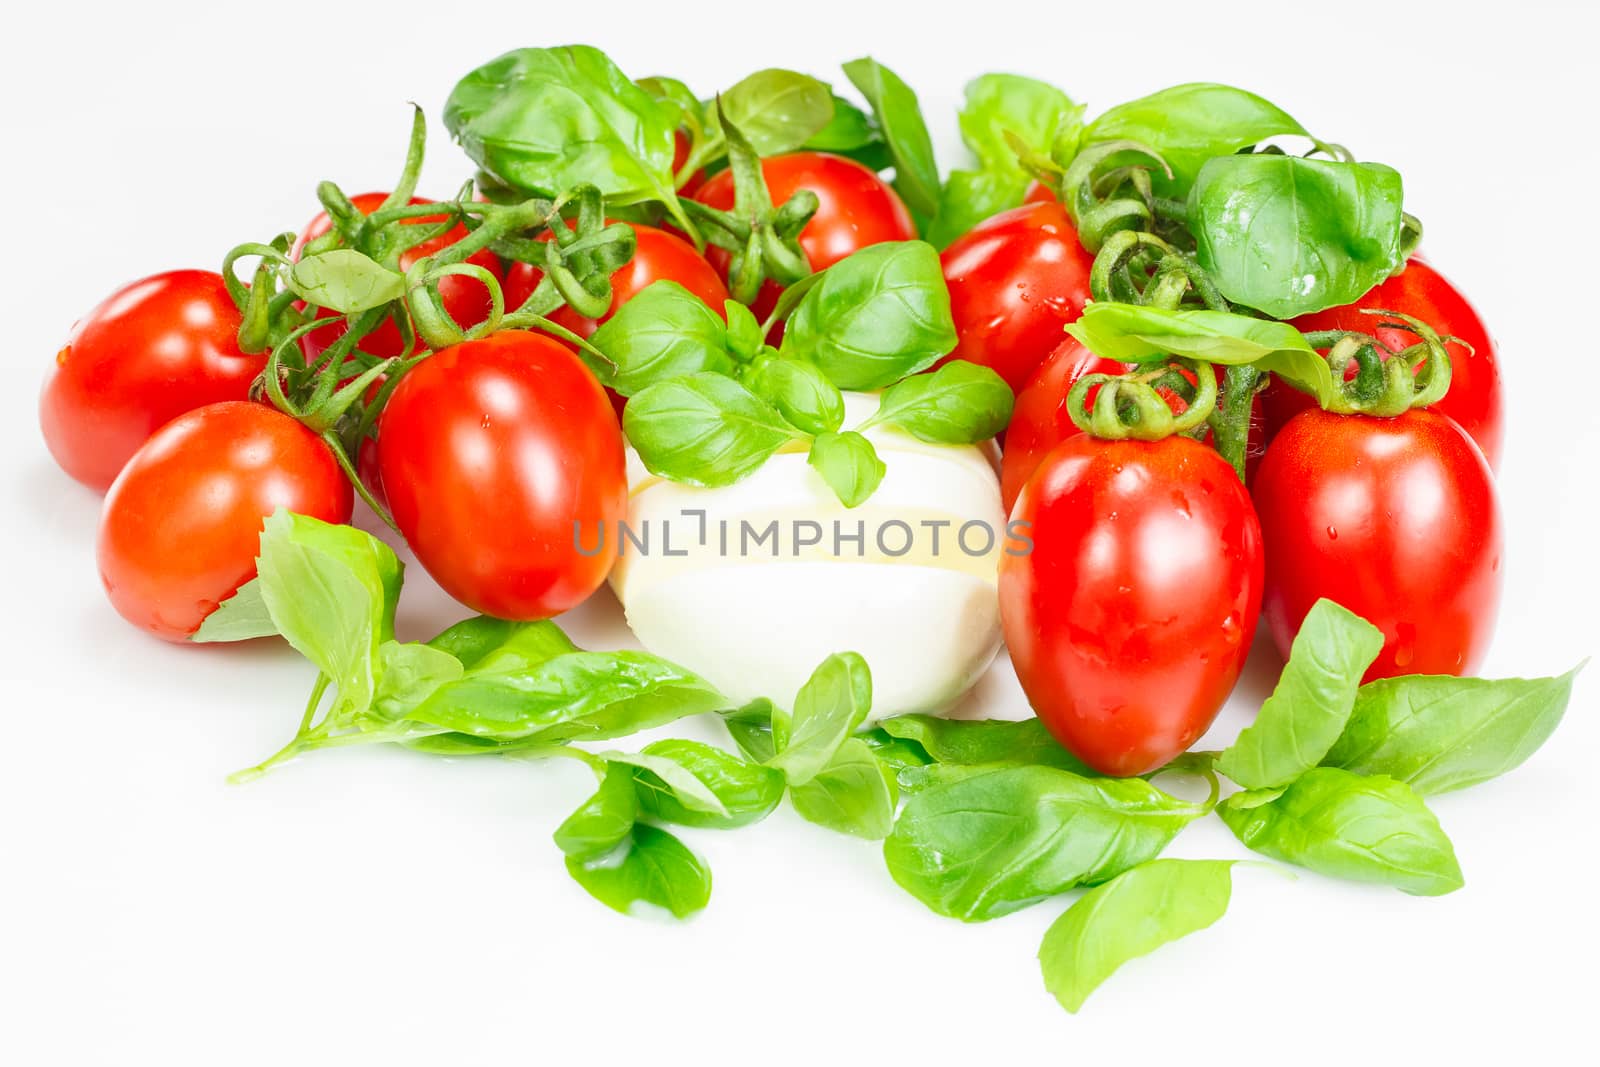 Tomatoes and mozzarella cheese by Slast20